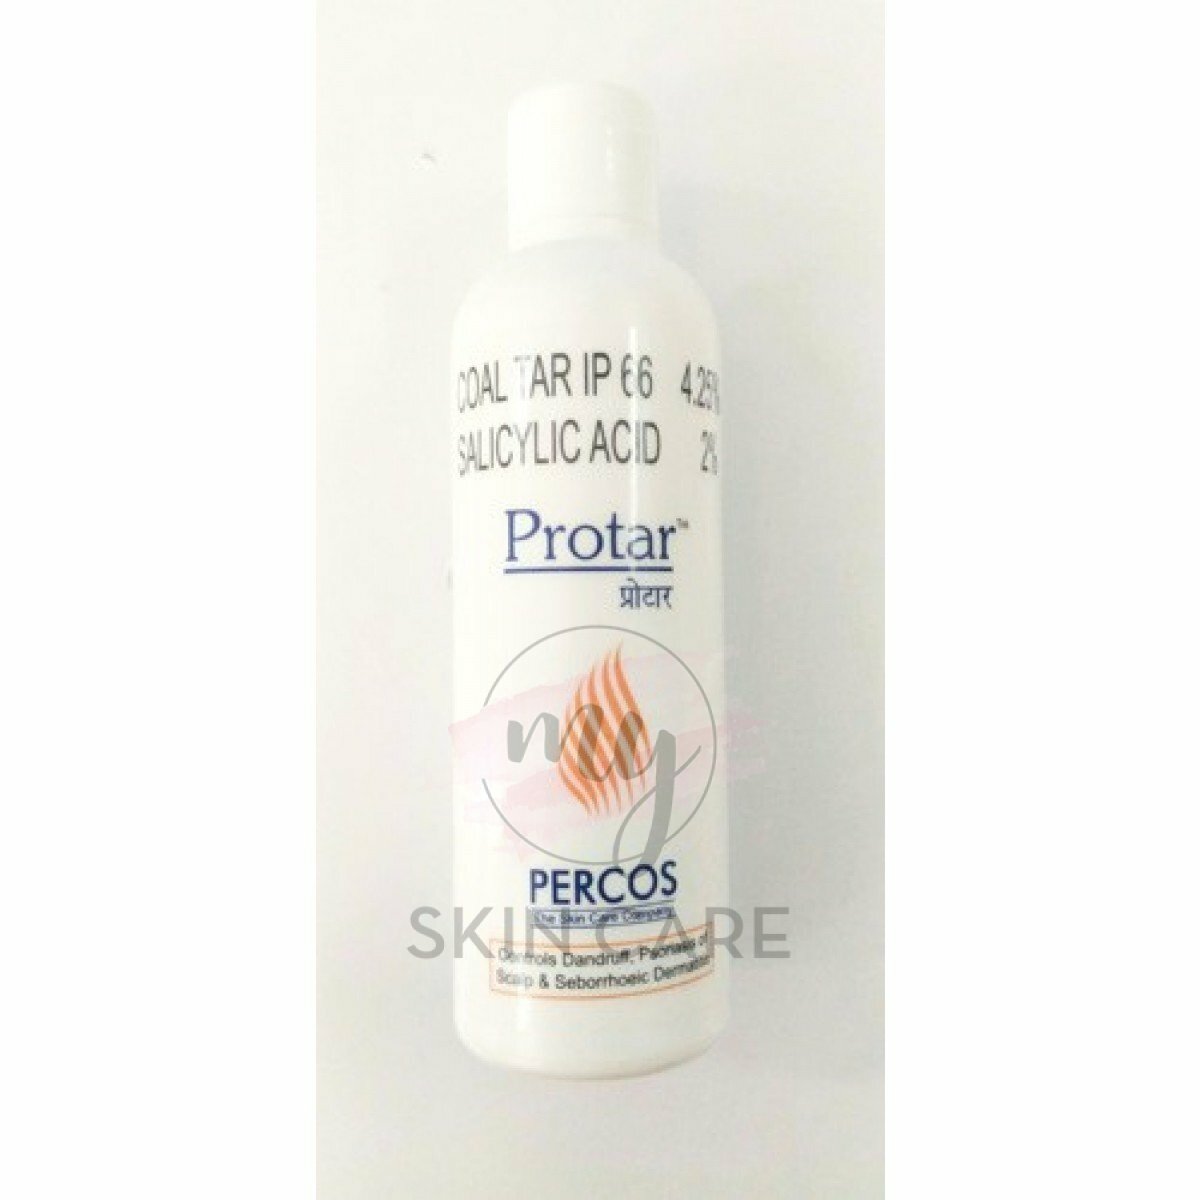 Buy Protar Sol 200 Ml from Percos India Pvt. Ltd. in India